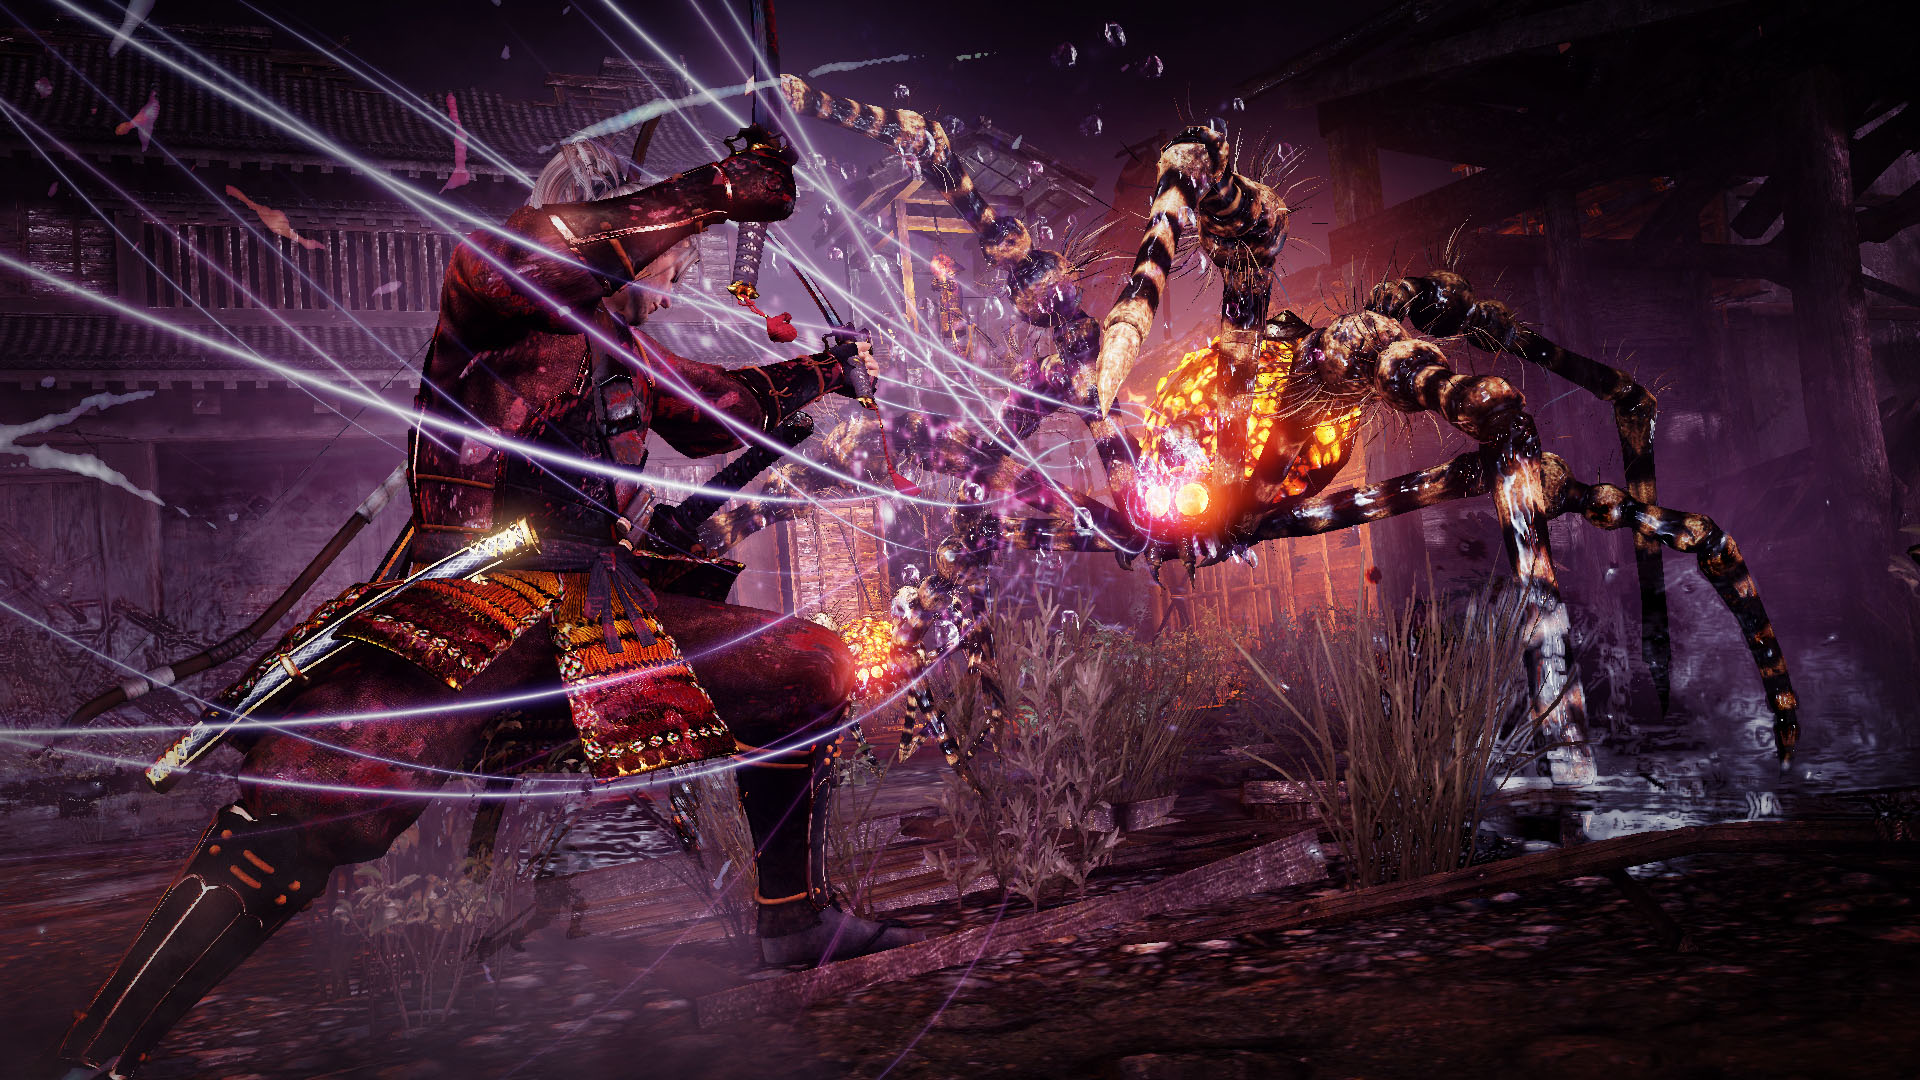 Report: PC Version for Nioh Has No Mouse-Control Support